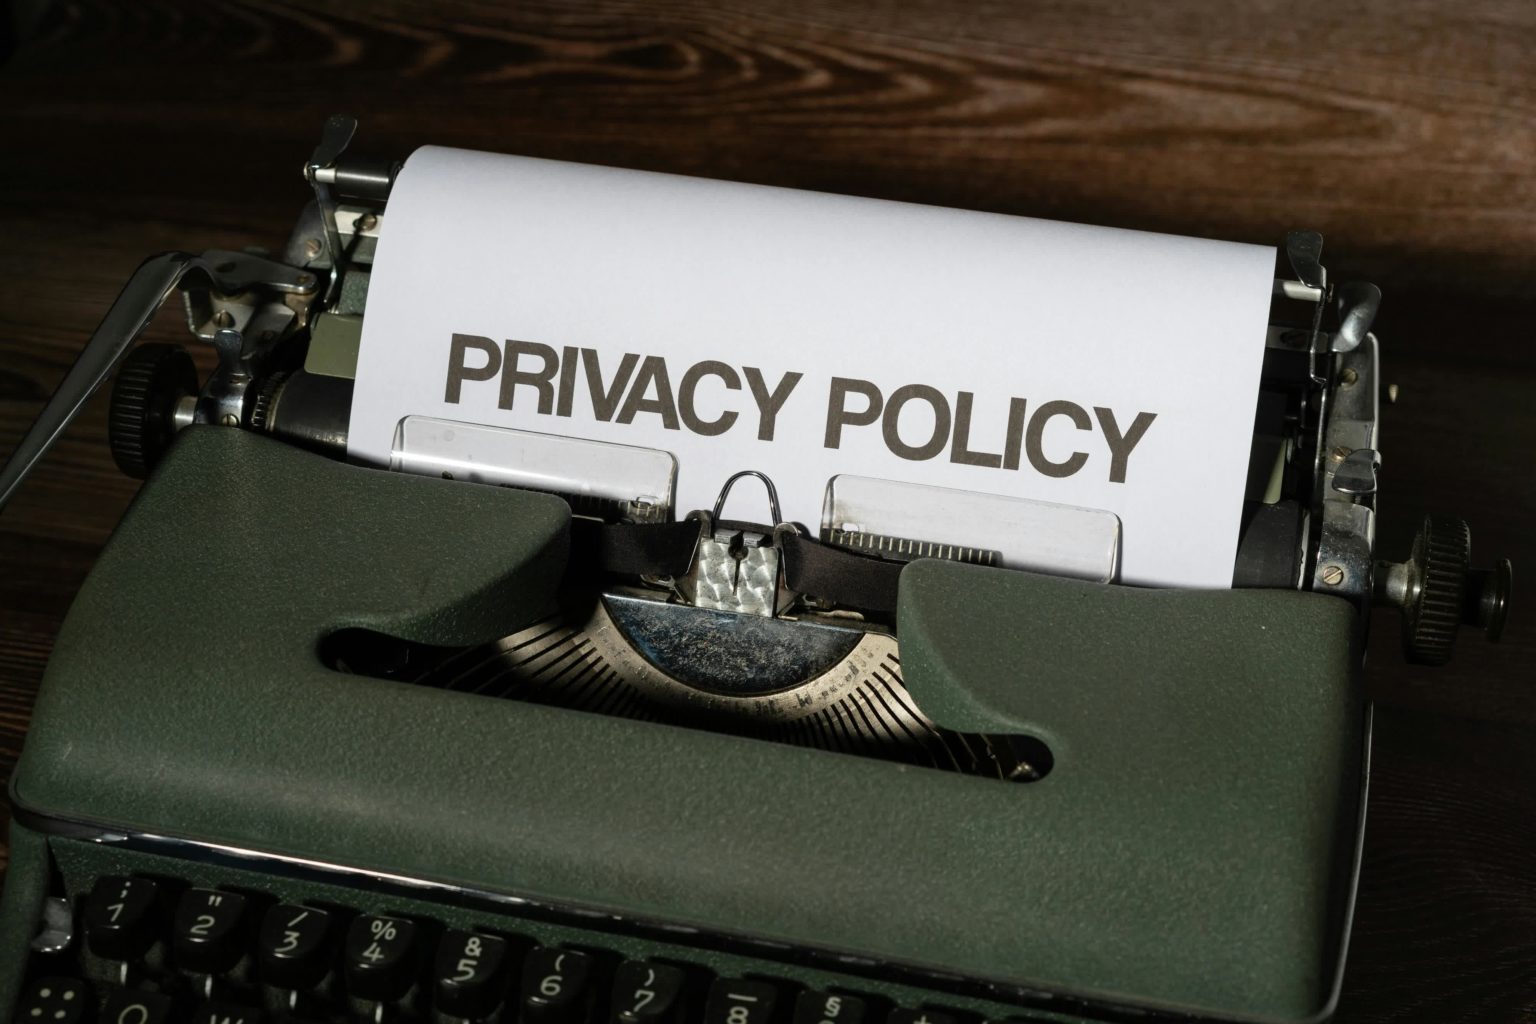 Google, Snap, Meta and many others are quietly changing privacy policies to allow for AI training